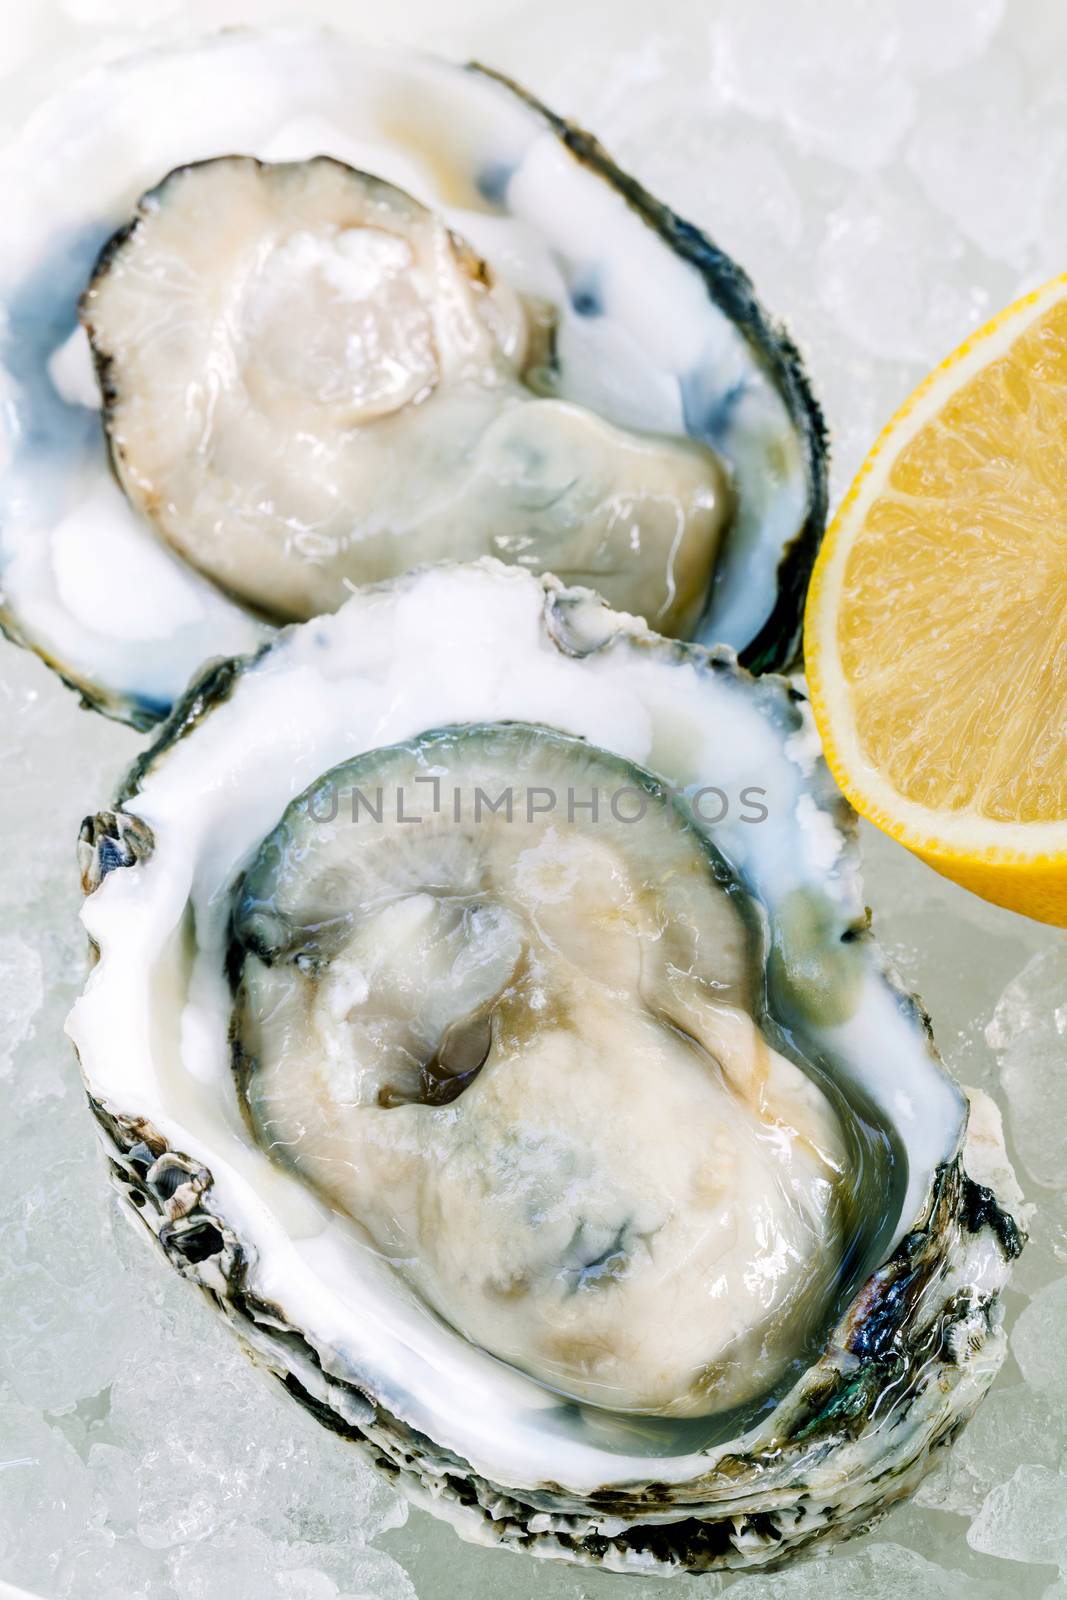 Fresh Oysters with lemon on ice background. Opened fresh oysters for  appetizer with selective focus on ice texture .